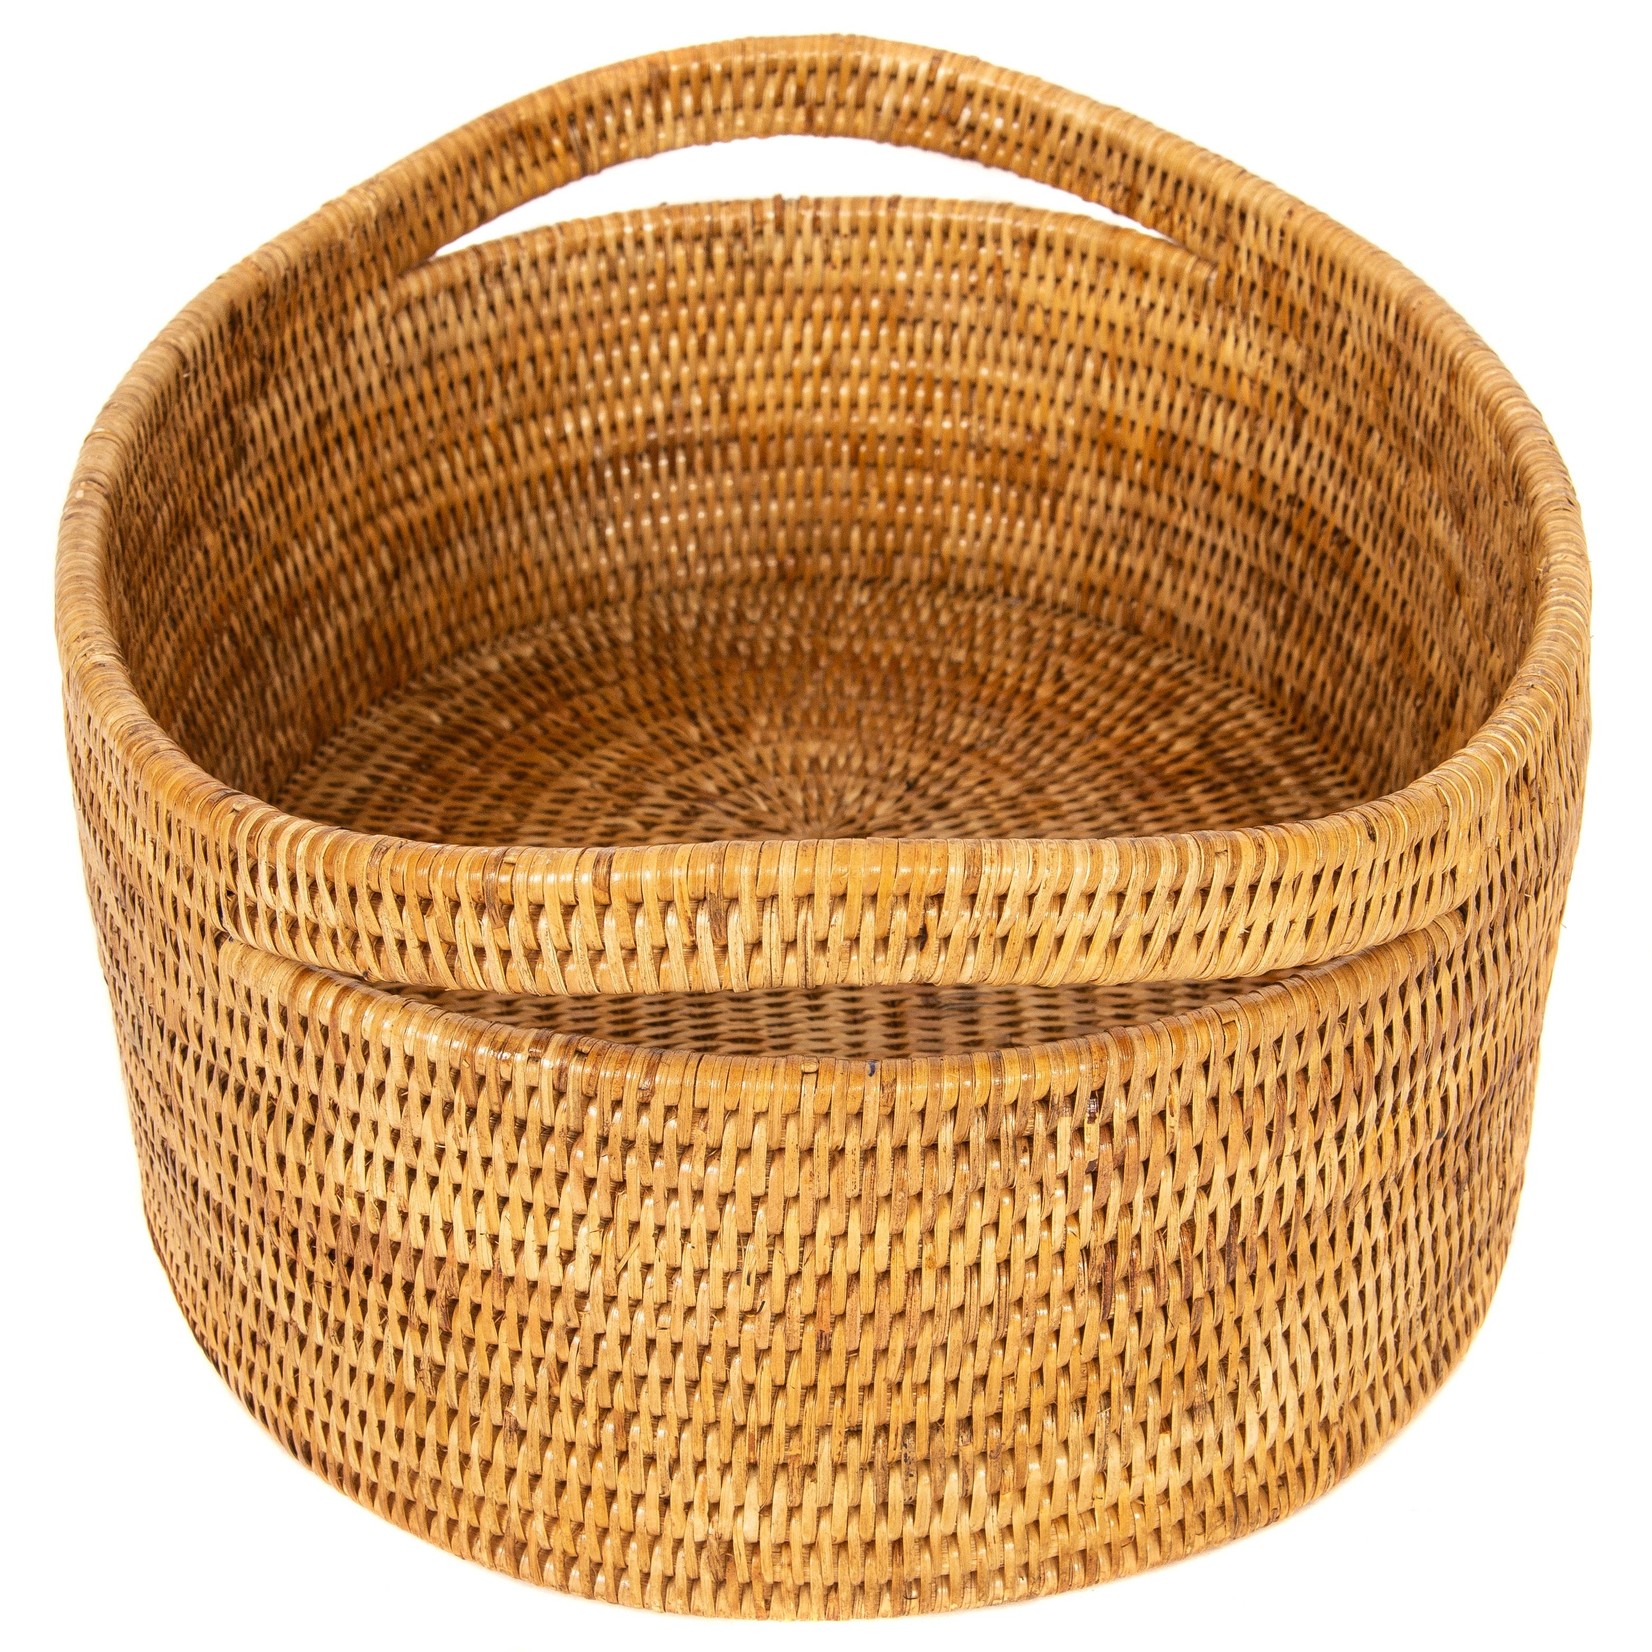 Artifacts Trading Company Rattan Oval Basket